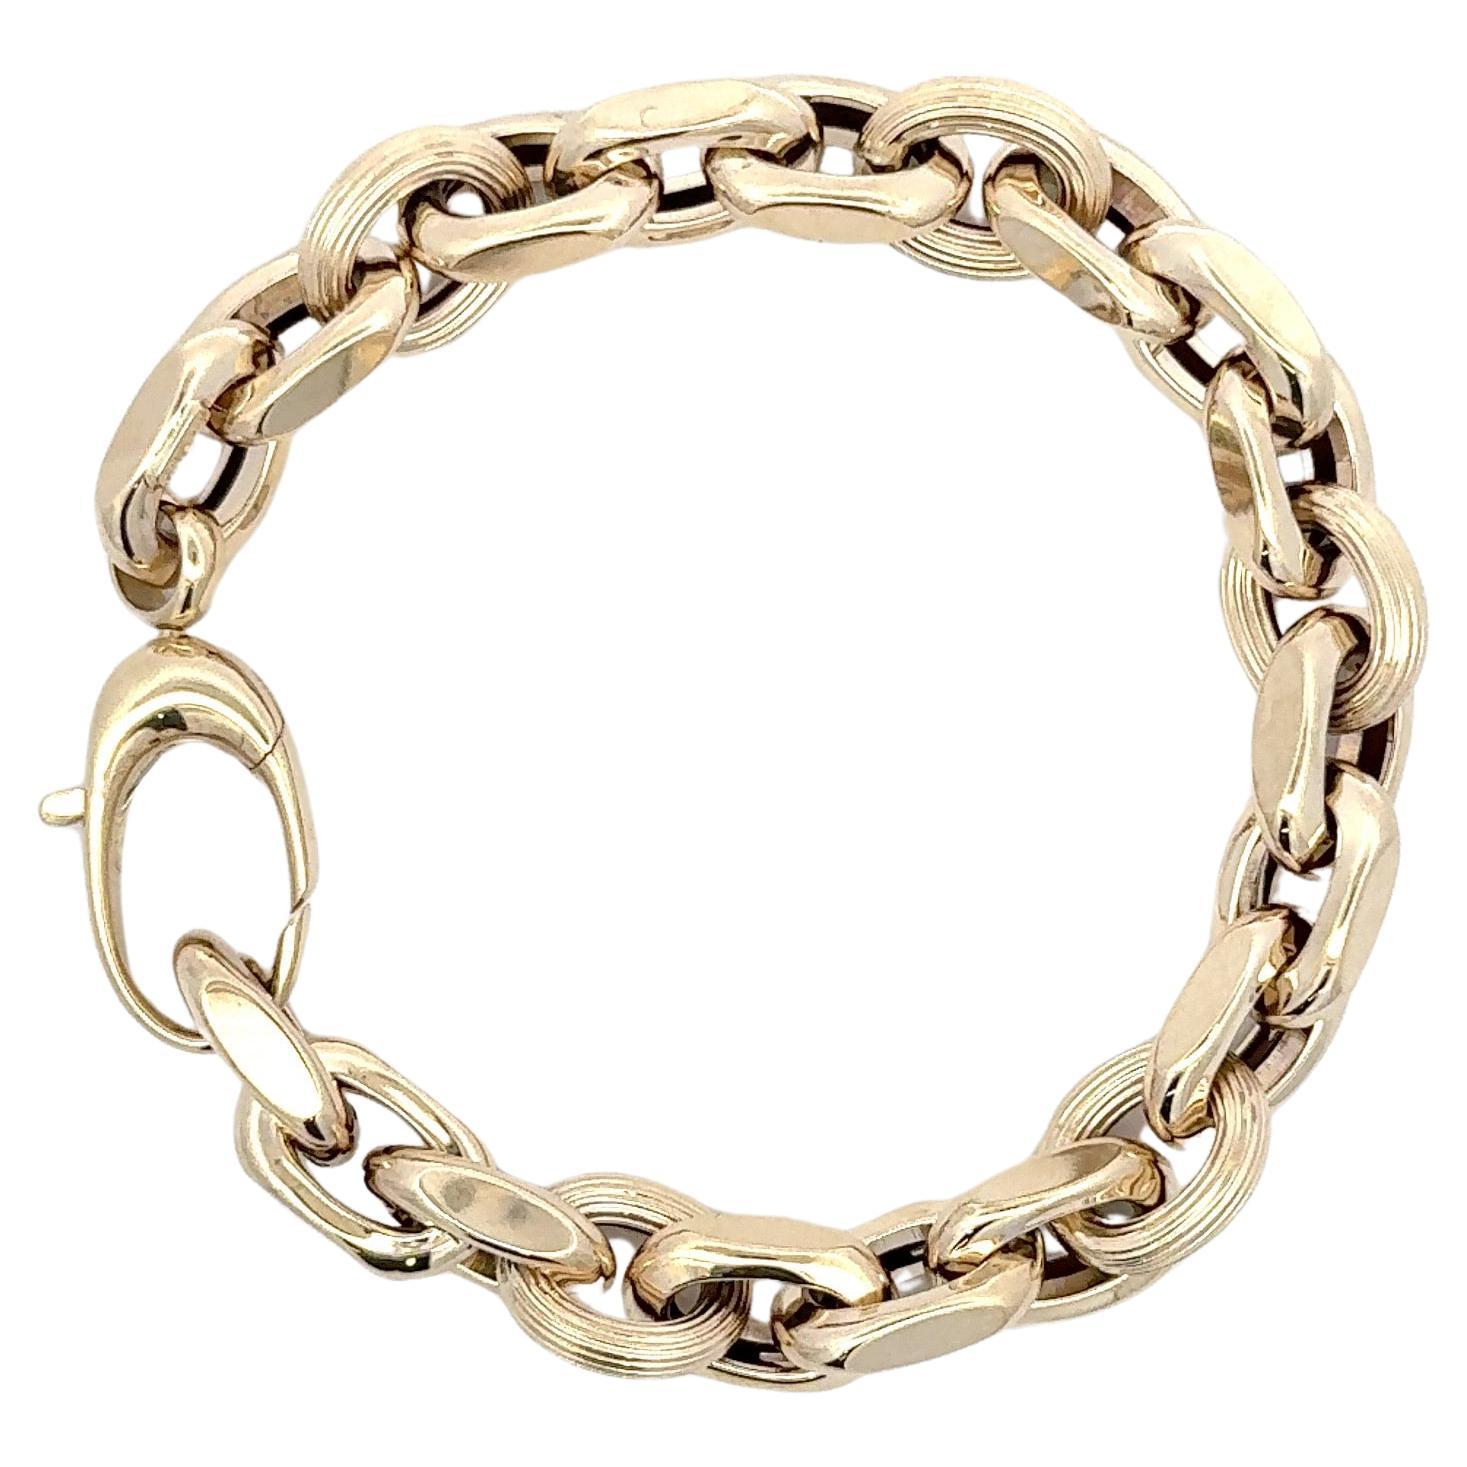 Italian 14 Karat Yellow Gold Oval Textured & High Polished Link Bracelet 11.4 GR In New Condition For Sale In New York, NY